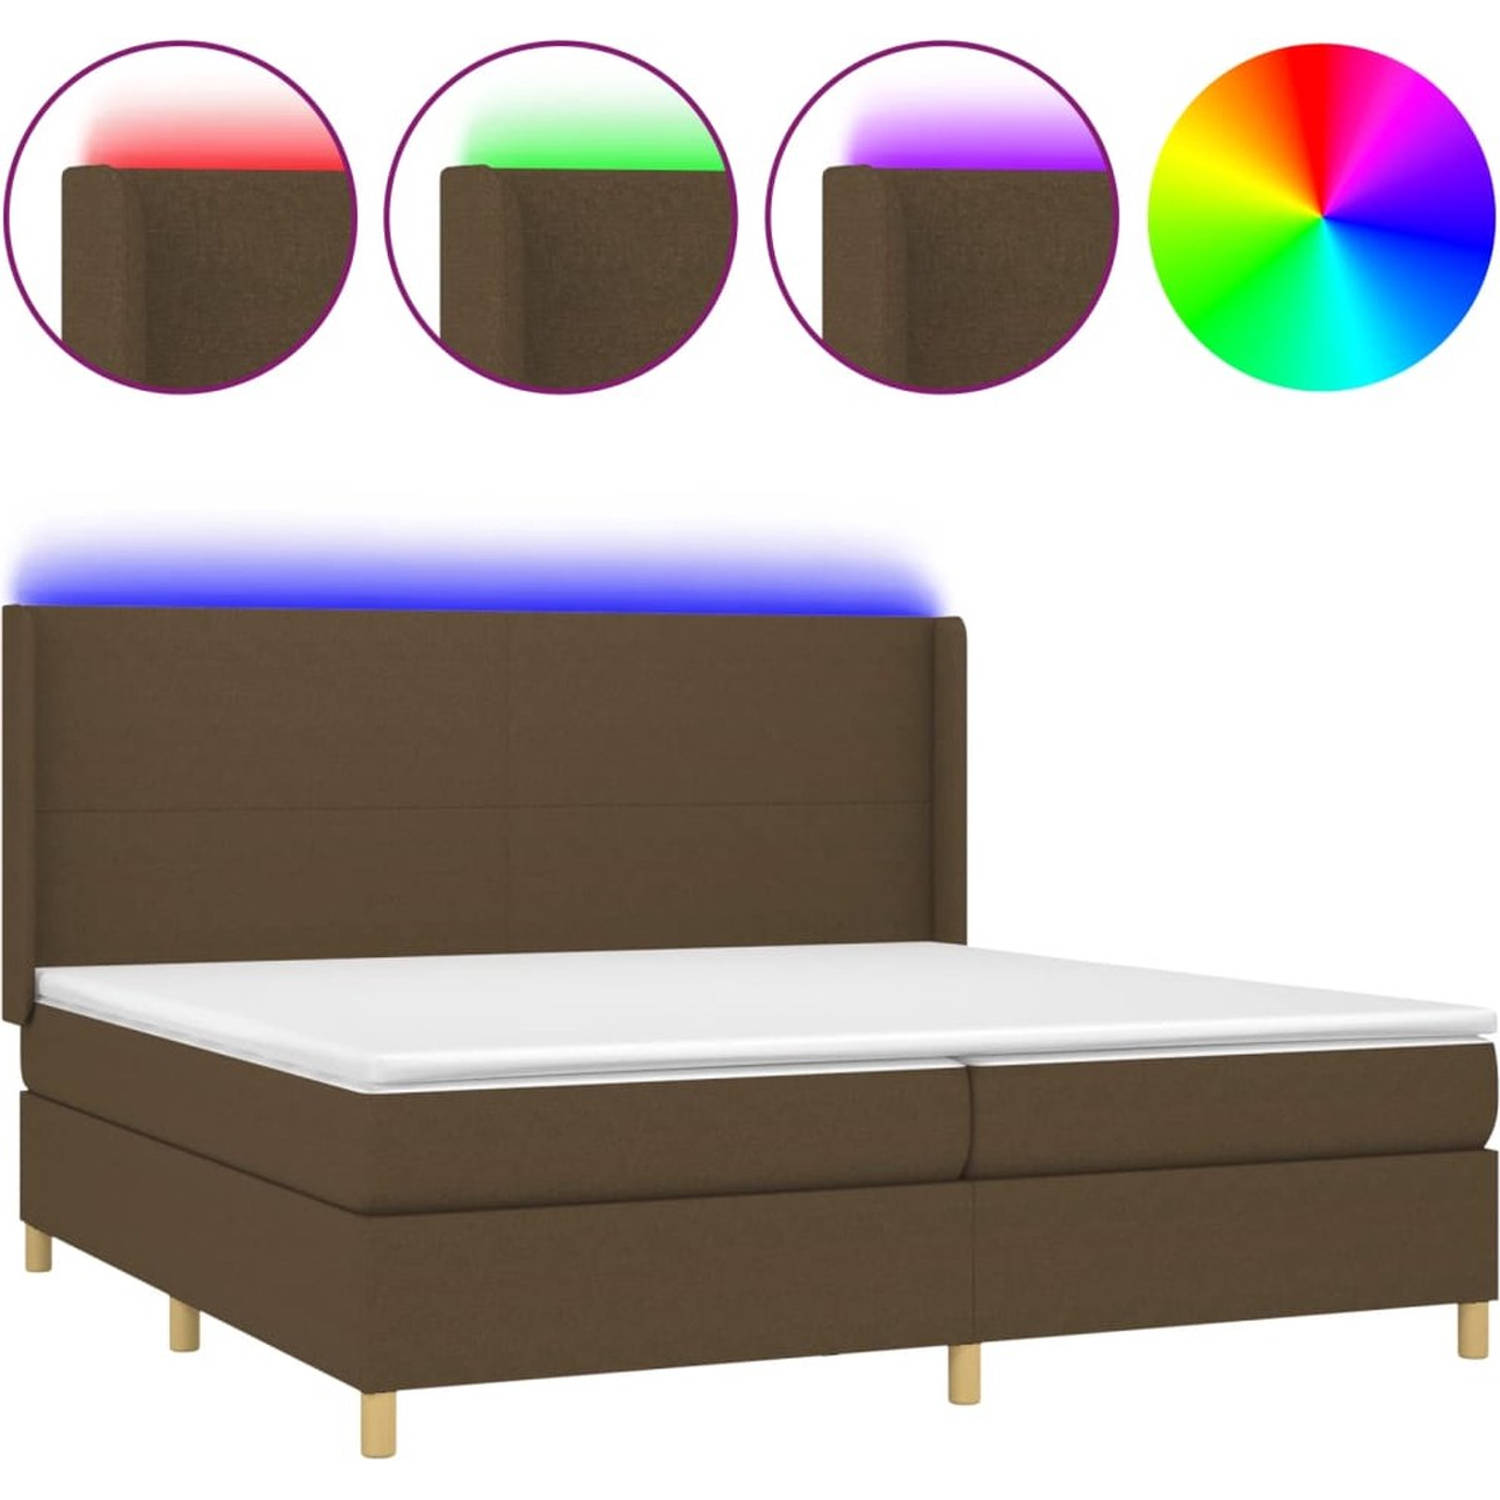 The Living Store Boxspring Dark Brown - Pocket Spring Mattress - Breathable Fabric - Adjustable Headboard - Colorful LED Lighting - Skin-Friendly Topper - USB Connection